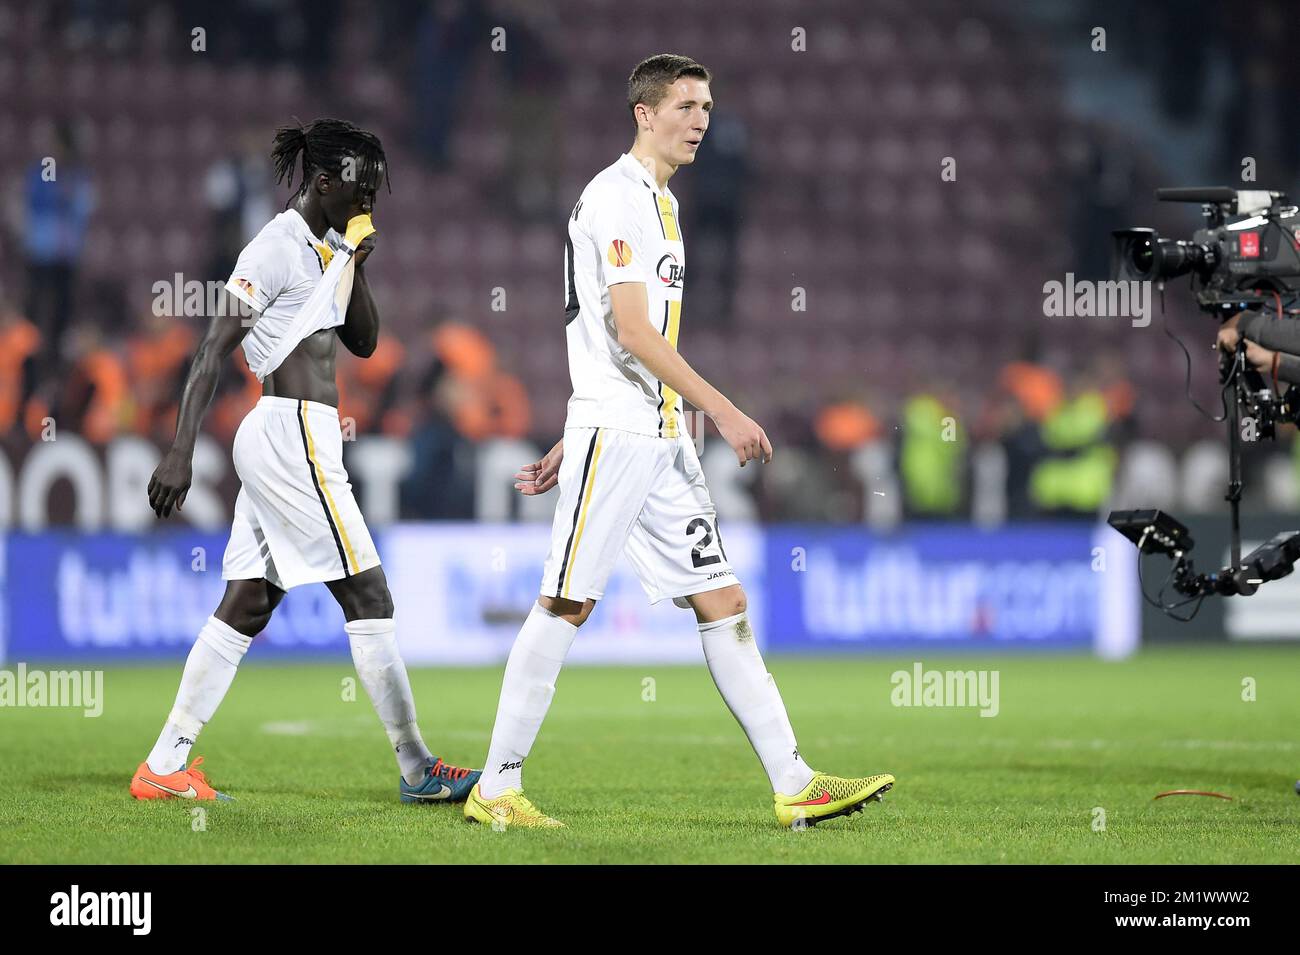 20141023 - TRABZON, TURKEY: Lokeren's Mbaye Leye and Lokeren's Hans Vanaken look dejected after a game between Turkish club Trabzonspor AS and Belgian soccer team KSC Lokeren OVL in the Huseyin Avni Aker Stadium in Trabzon, Thursday 23 October 2014. It is the third day of the group stage of the UEFA Europa League competition, in group L. BELGA PHOTO YORICK JANSENS Stock Photo